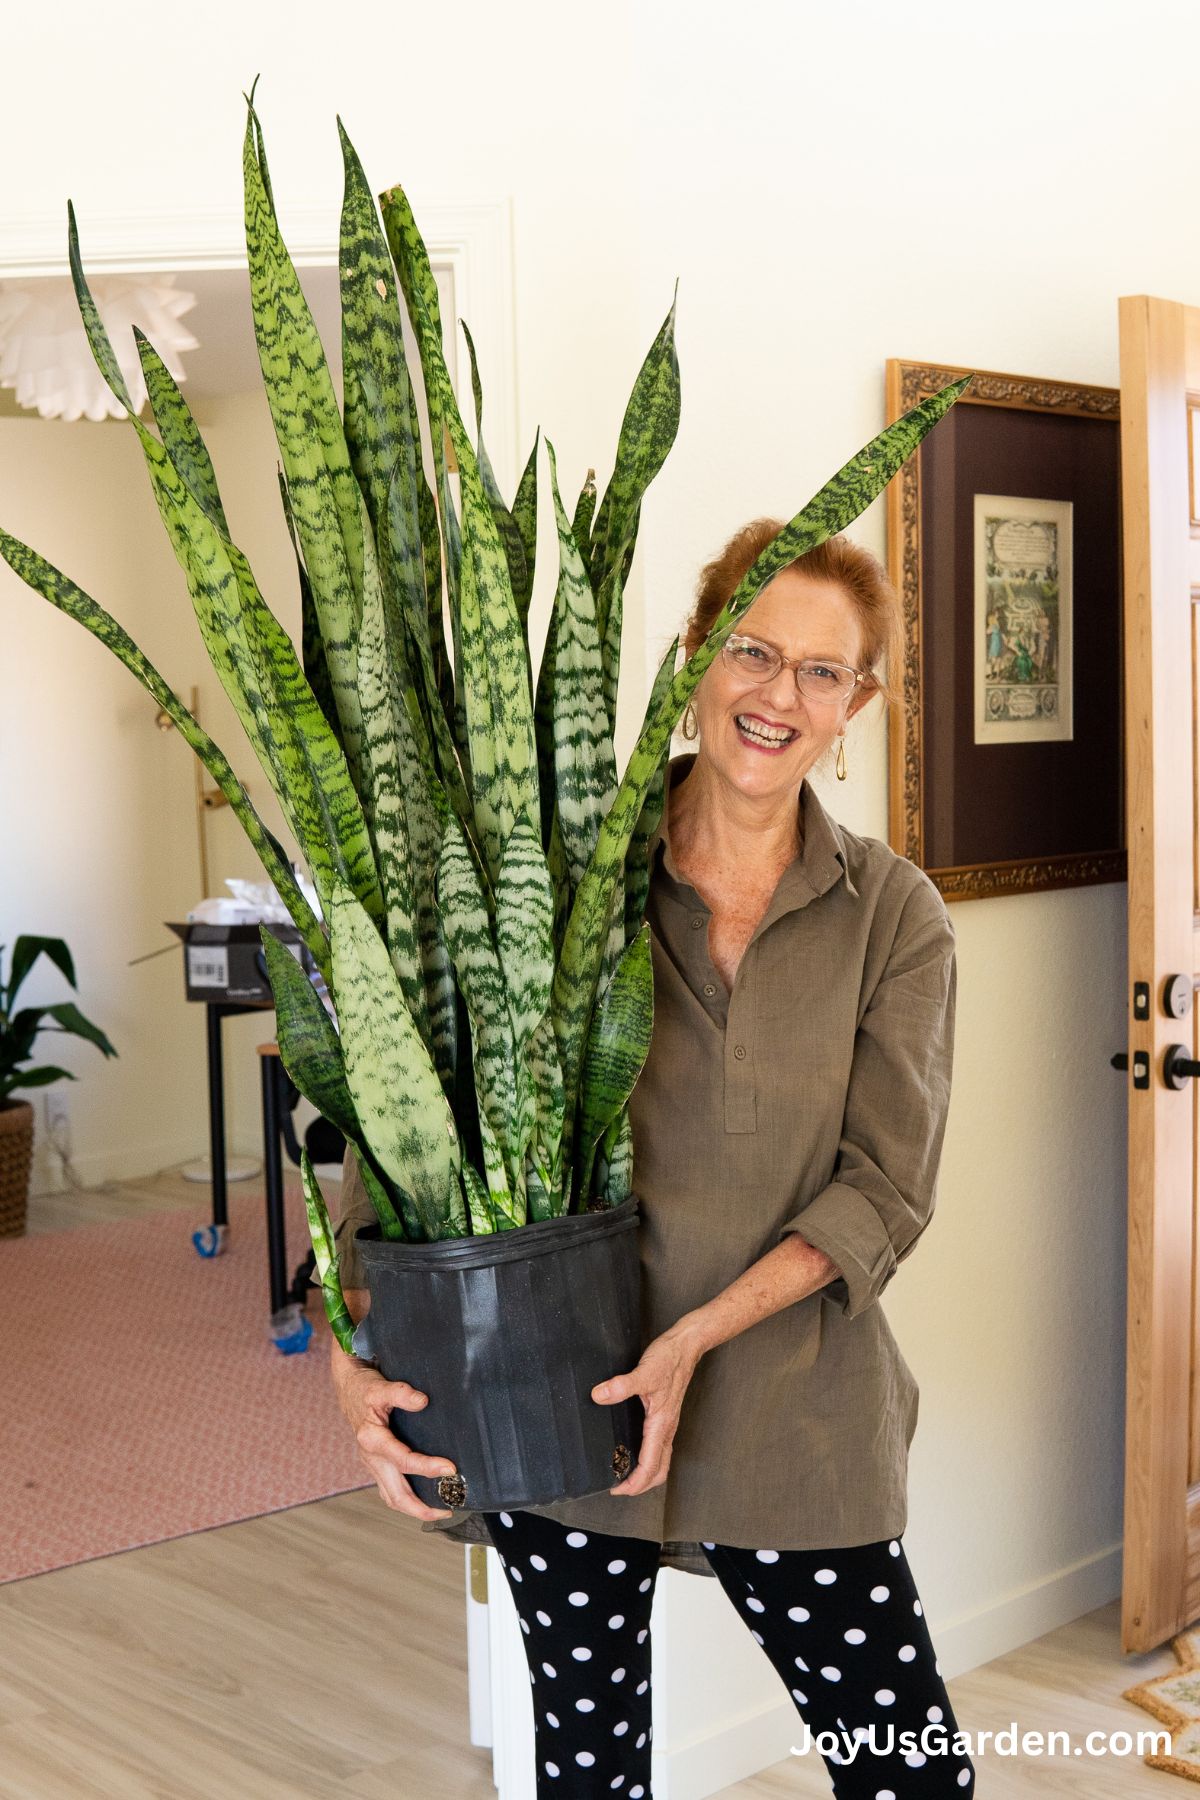 nell foster shown indoors smiling and holding a very large snake plant growing in plastic grow pot